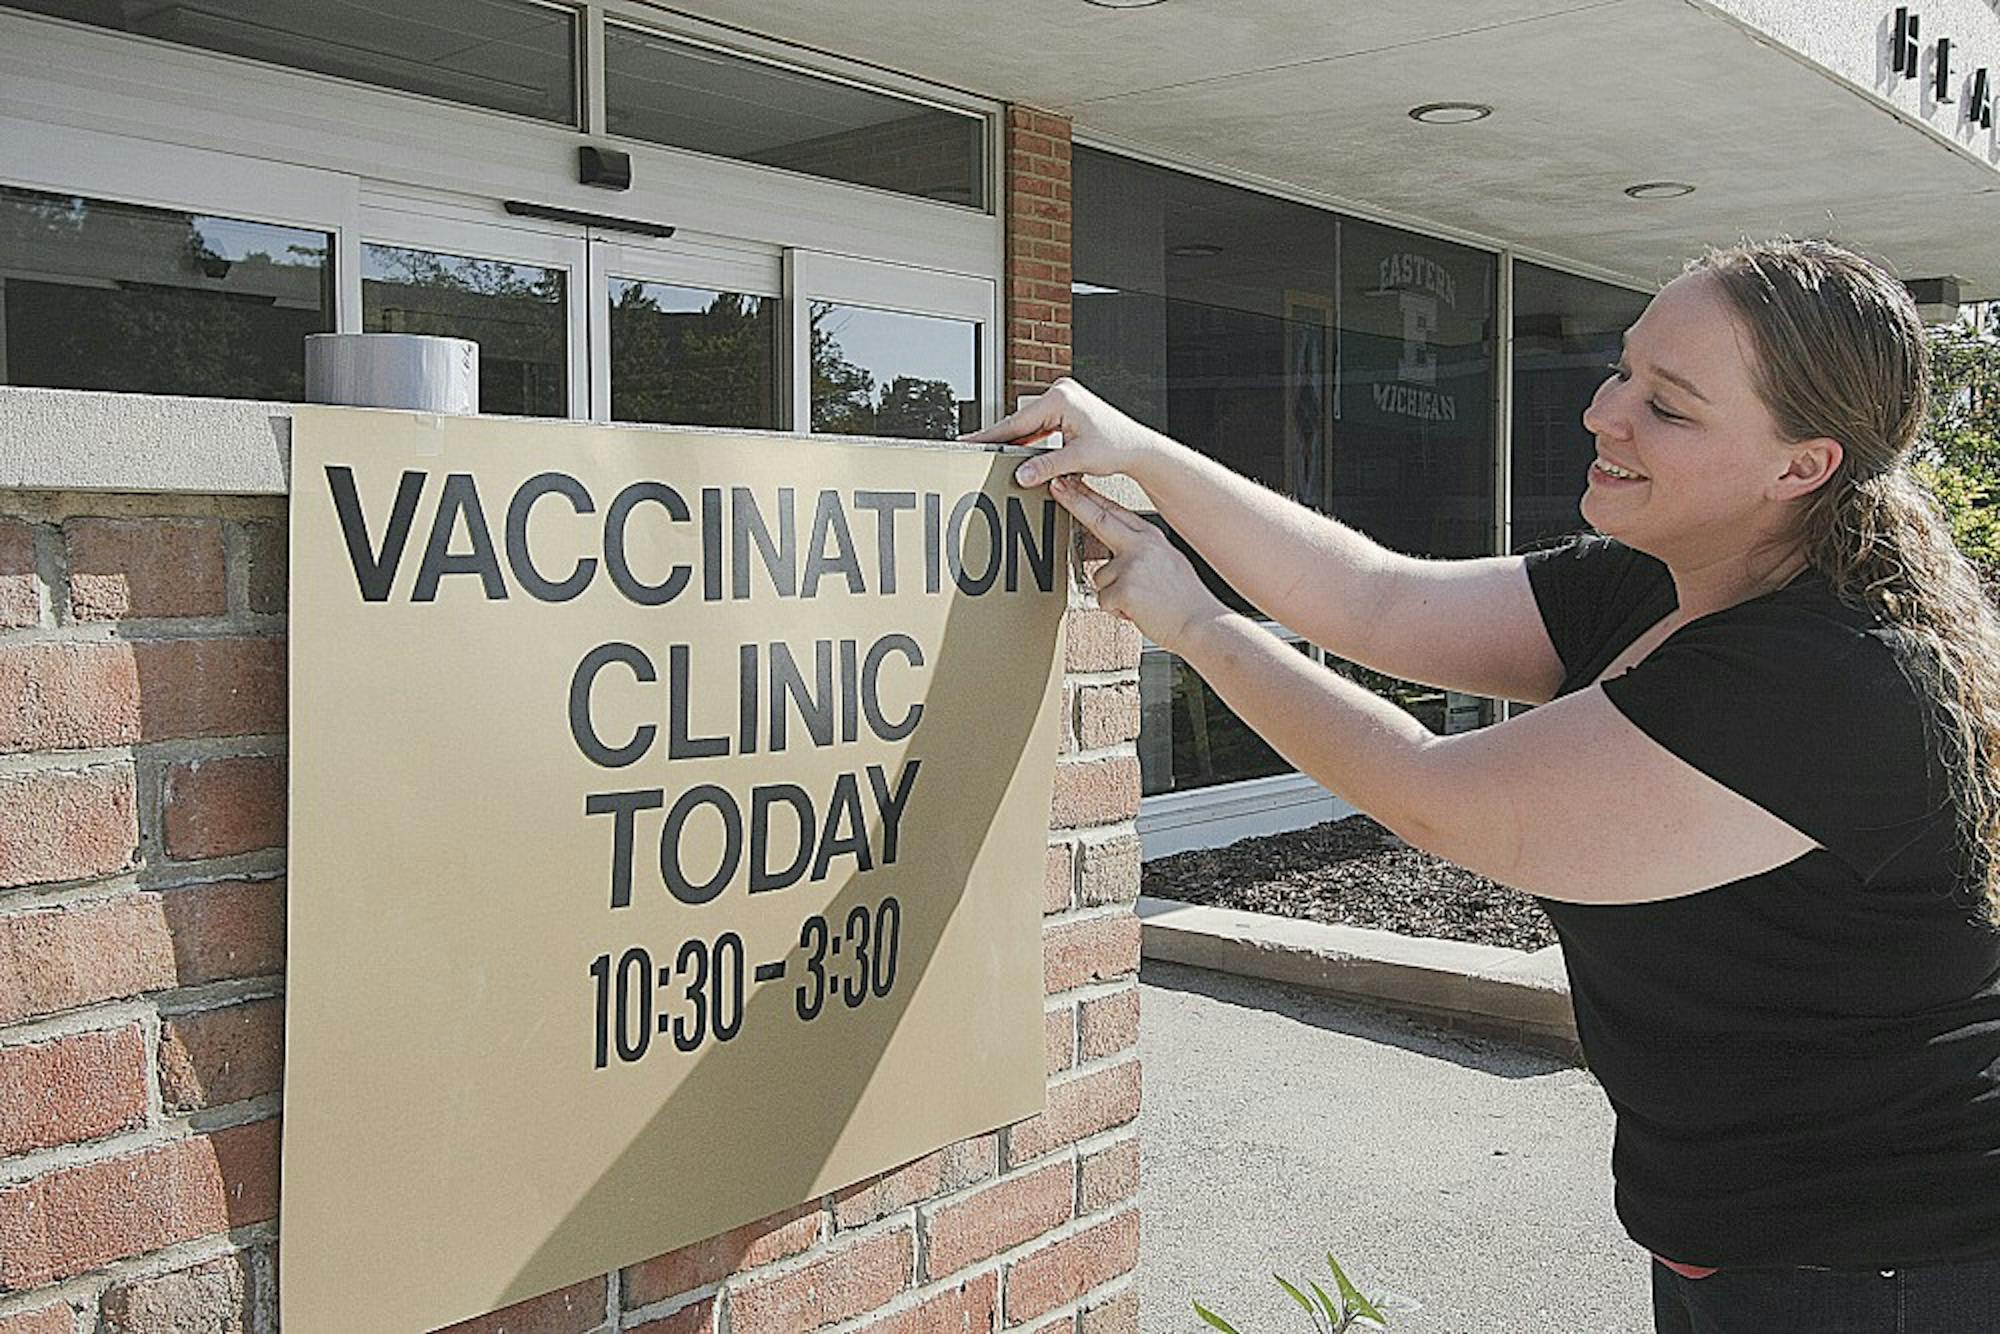 Amanda Lefled, the director of busines opperations at Snow Health Center, is shown here posting a sign with information about move in day vaccination times.